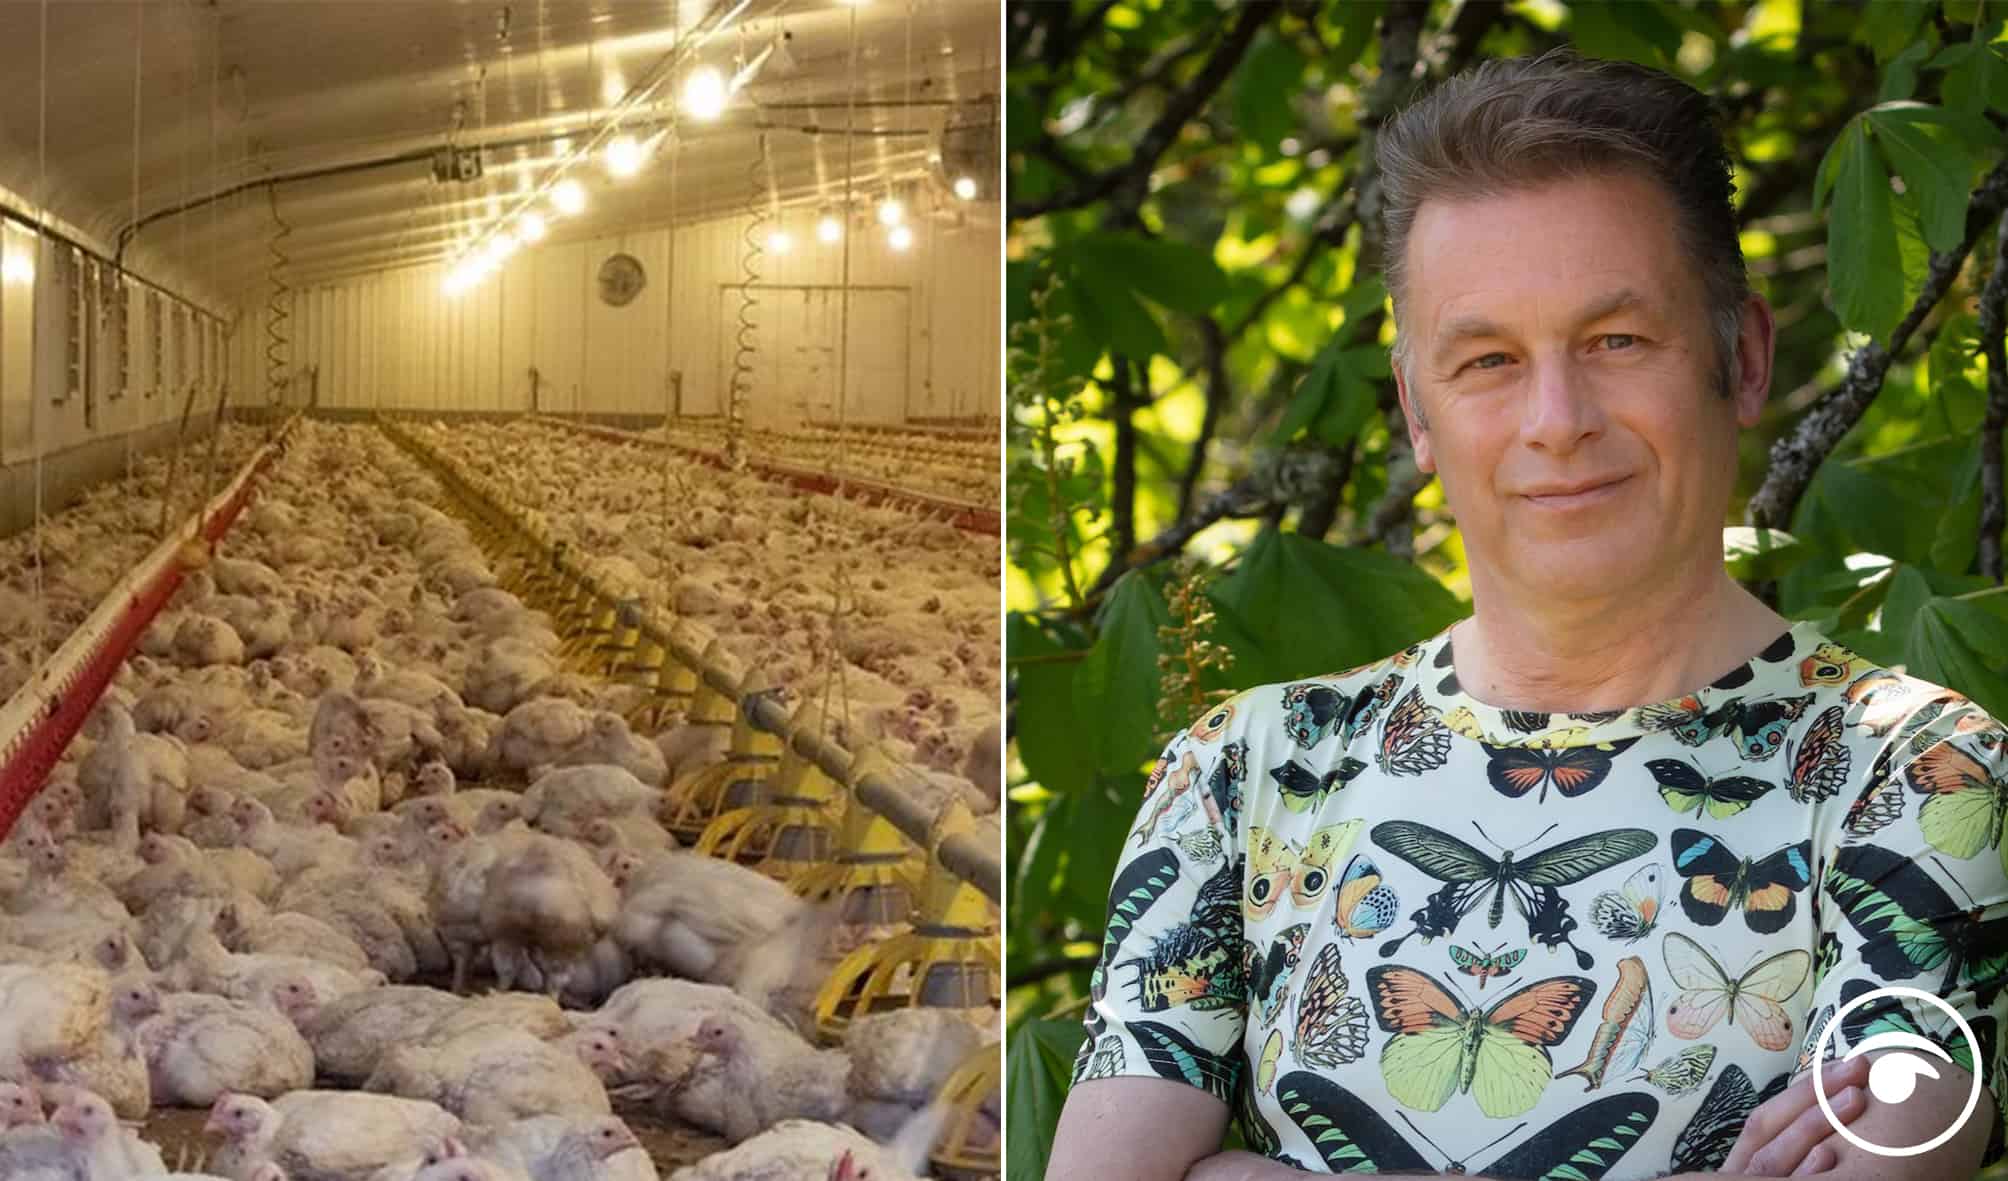 Supermarkets responsible for ‘biggest cause of hidden animal suffering,’ says Chris Packham